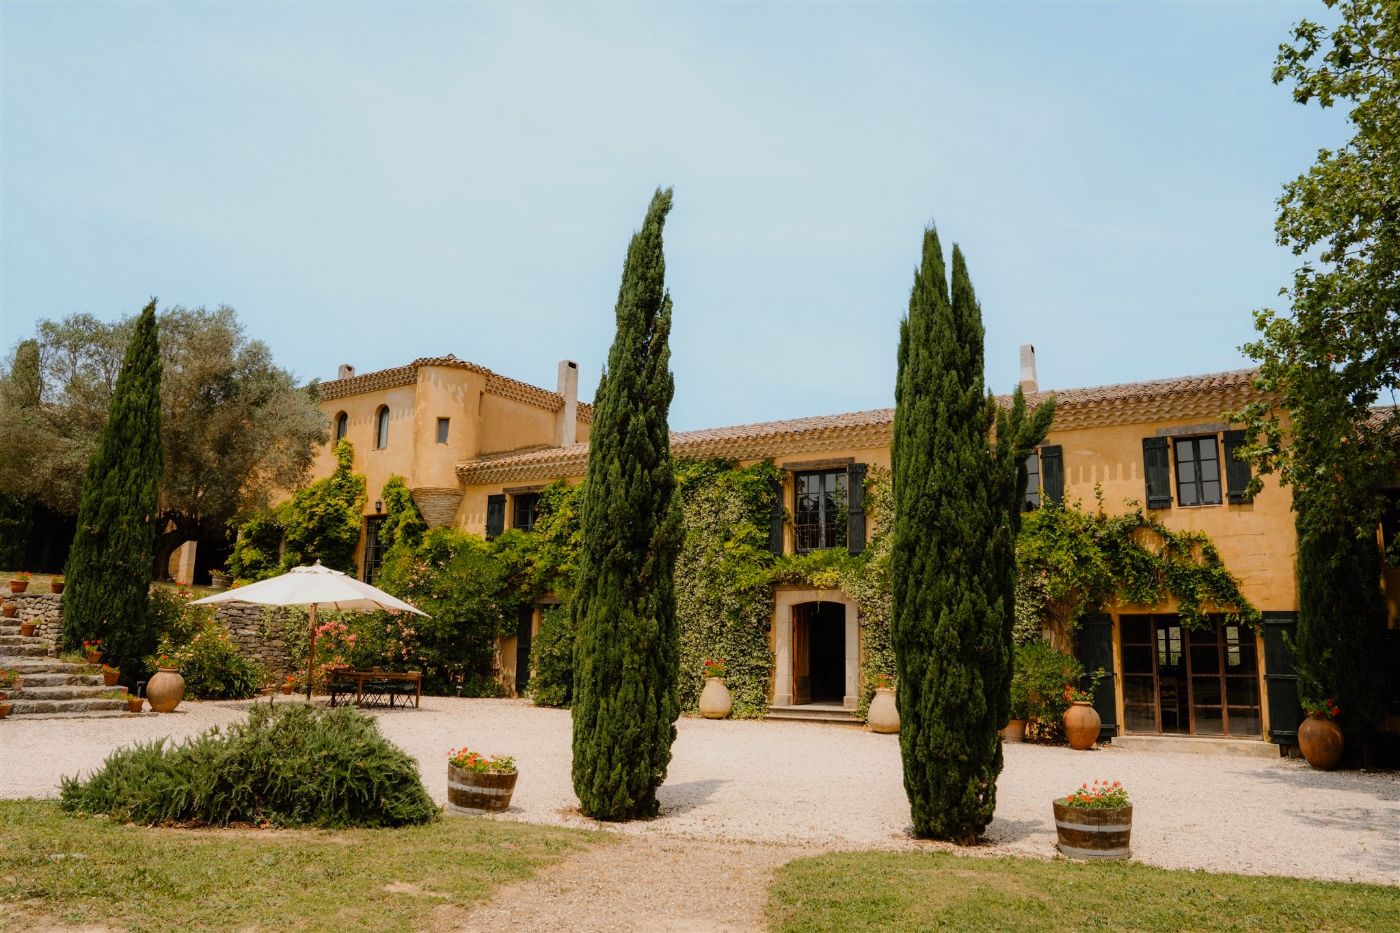 Exterior at Domaine de Corbieres in South West France